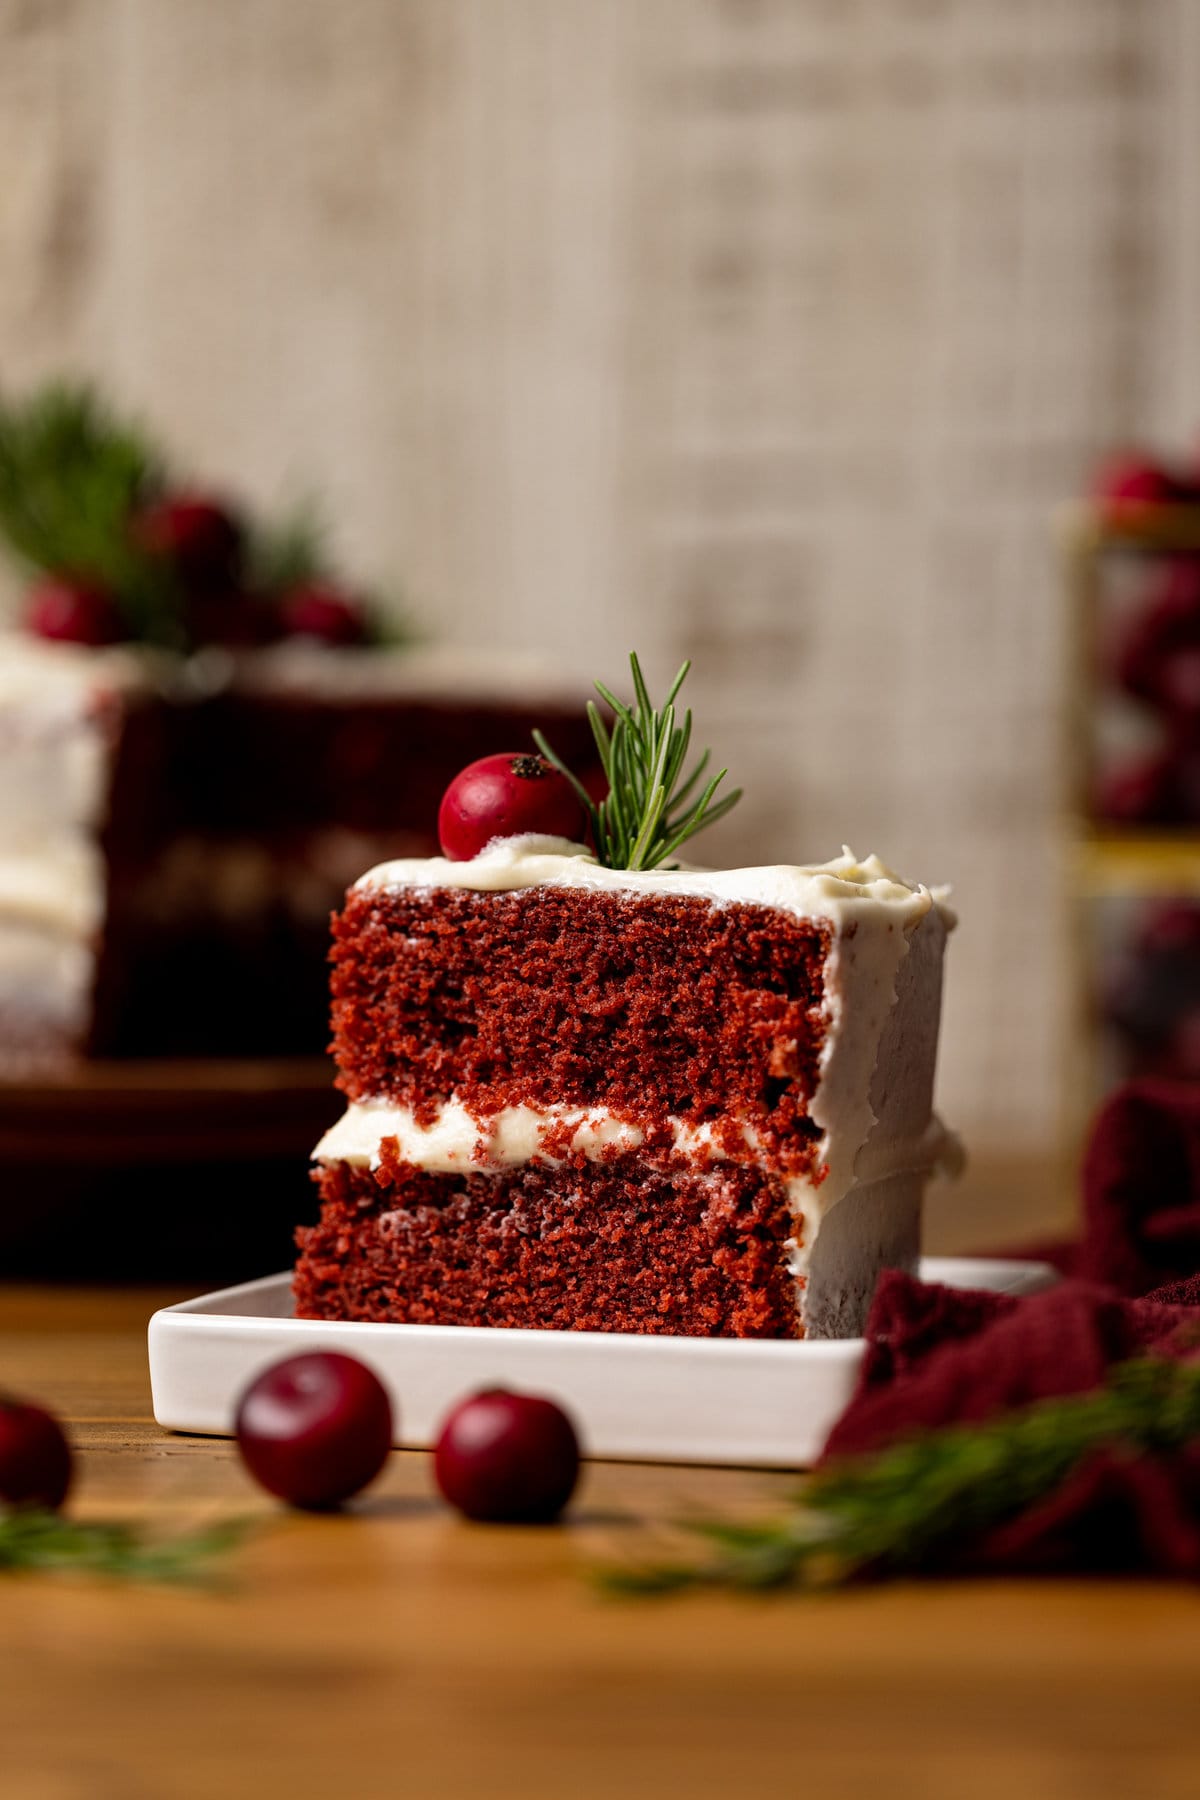 Decadent Red Velvet Cake with Cream Cheese Frosting